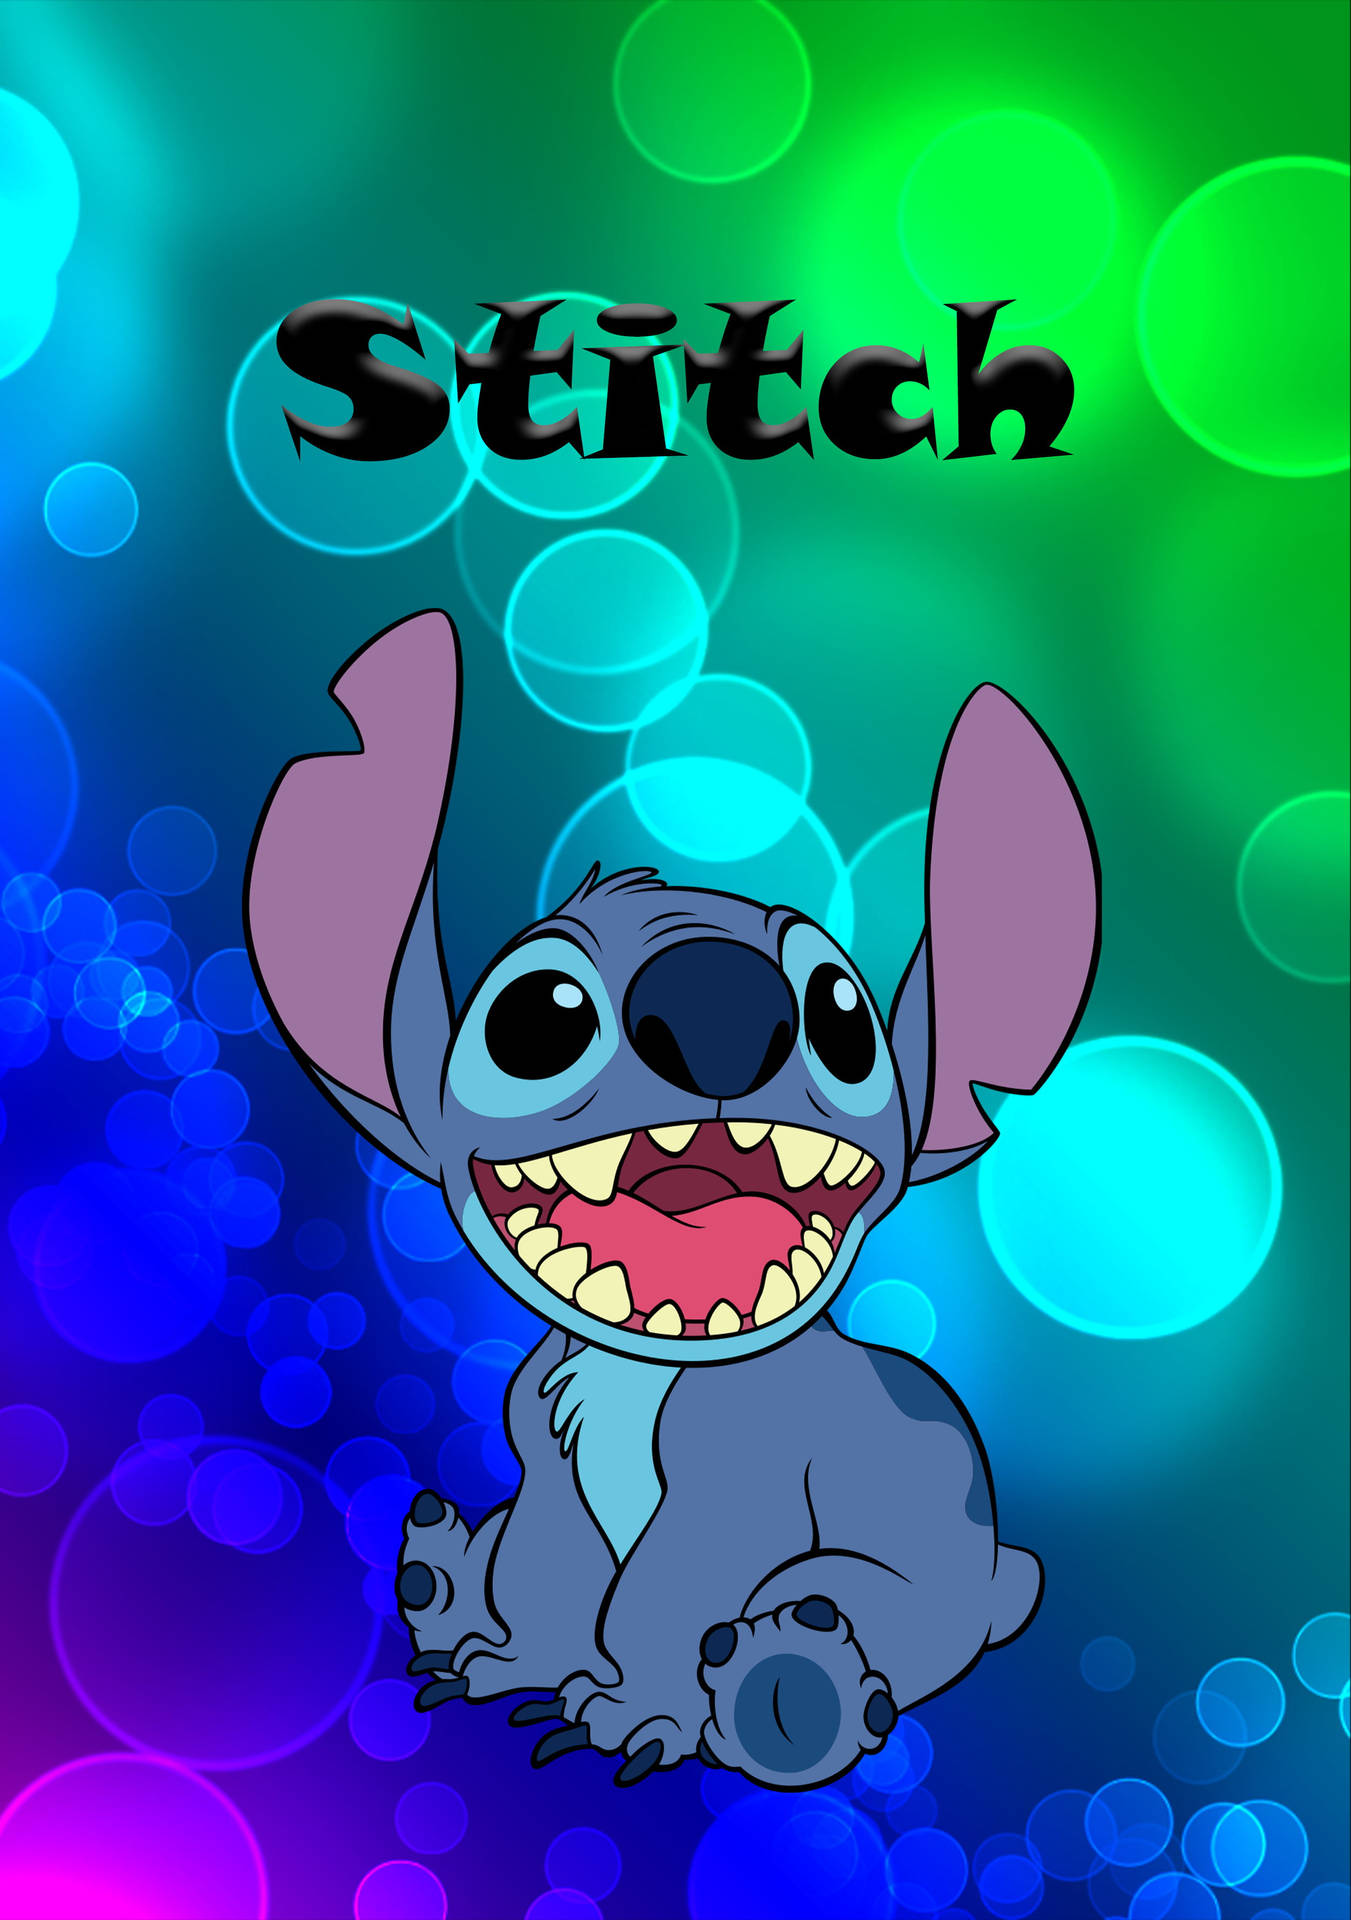 Stitch From Disney In Colorful Background Wallpaper